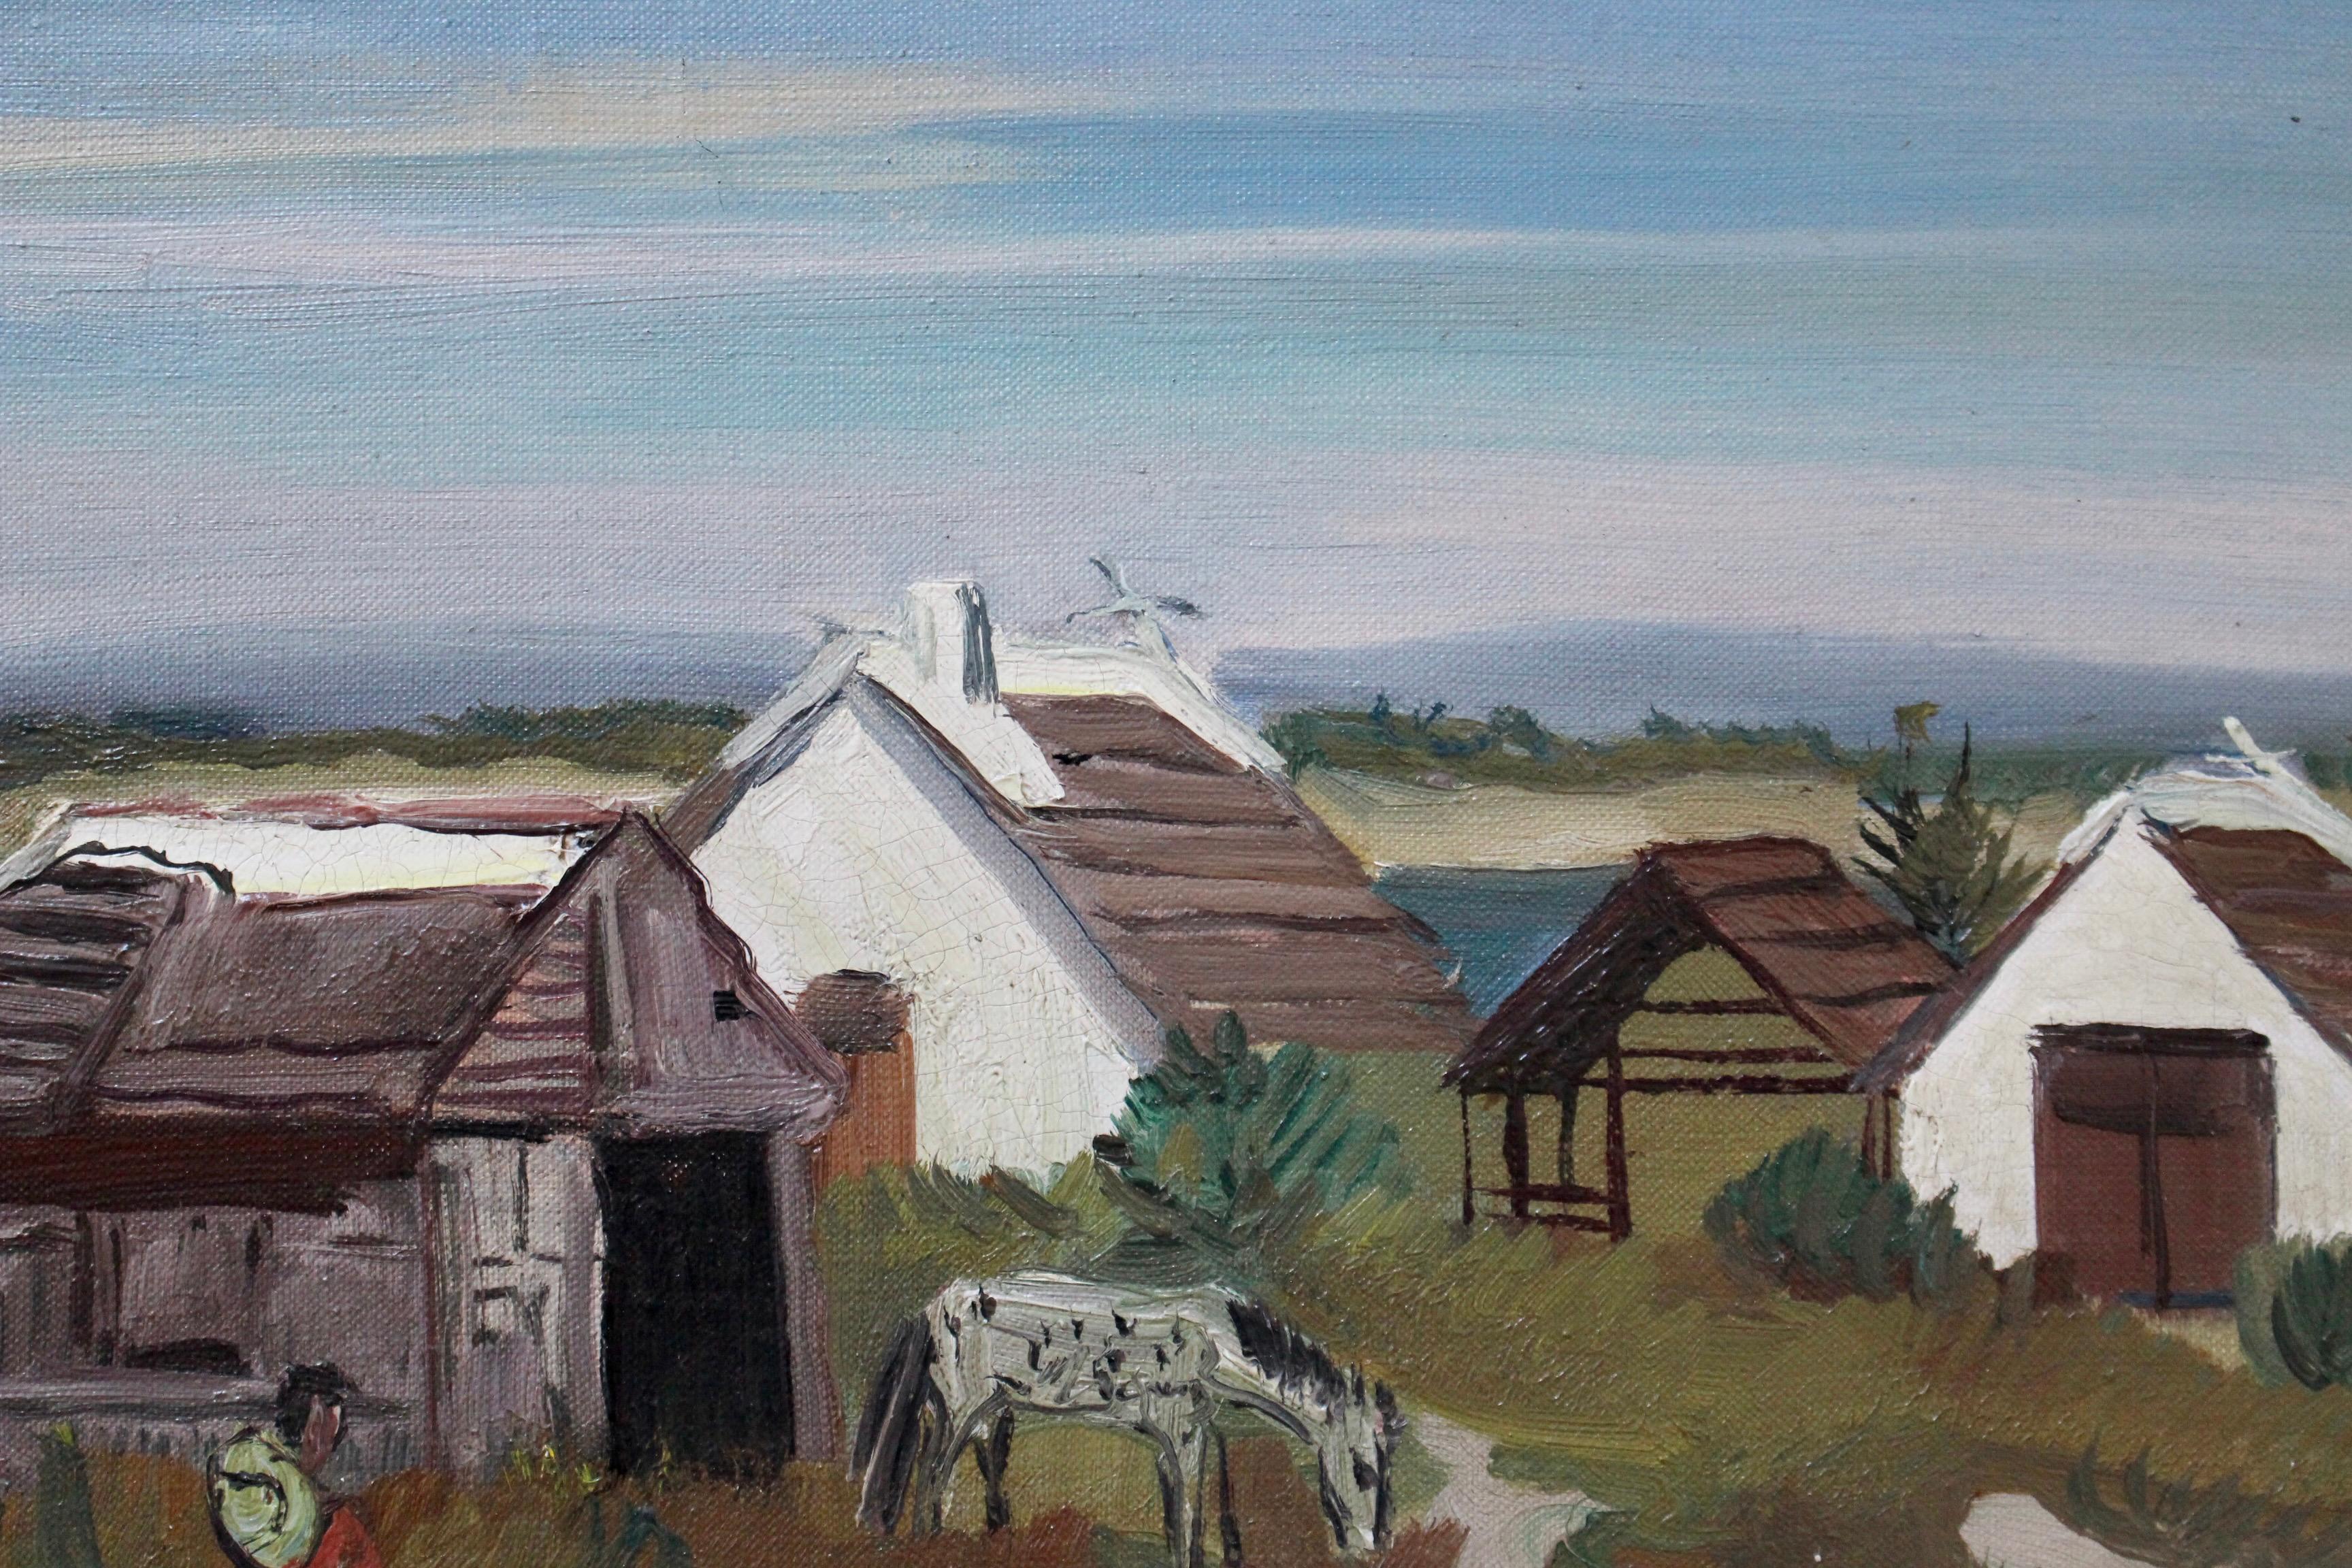 'Cabins in the Camargue' by Yves Brayer (circa 1950s). The Camargue is a vast, swampy delta near Arles, very exotic, with tall marsh grasses where pink flamingos, black bulls and white horses roam freely. This image depicts one of the gardians in a